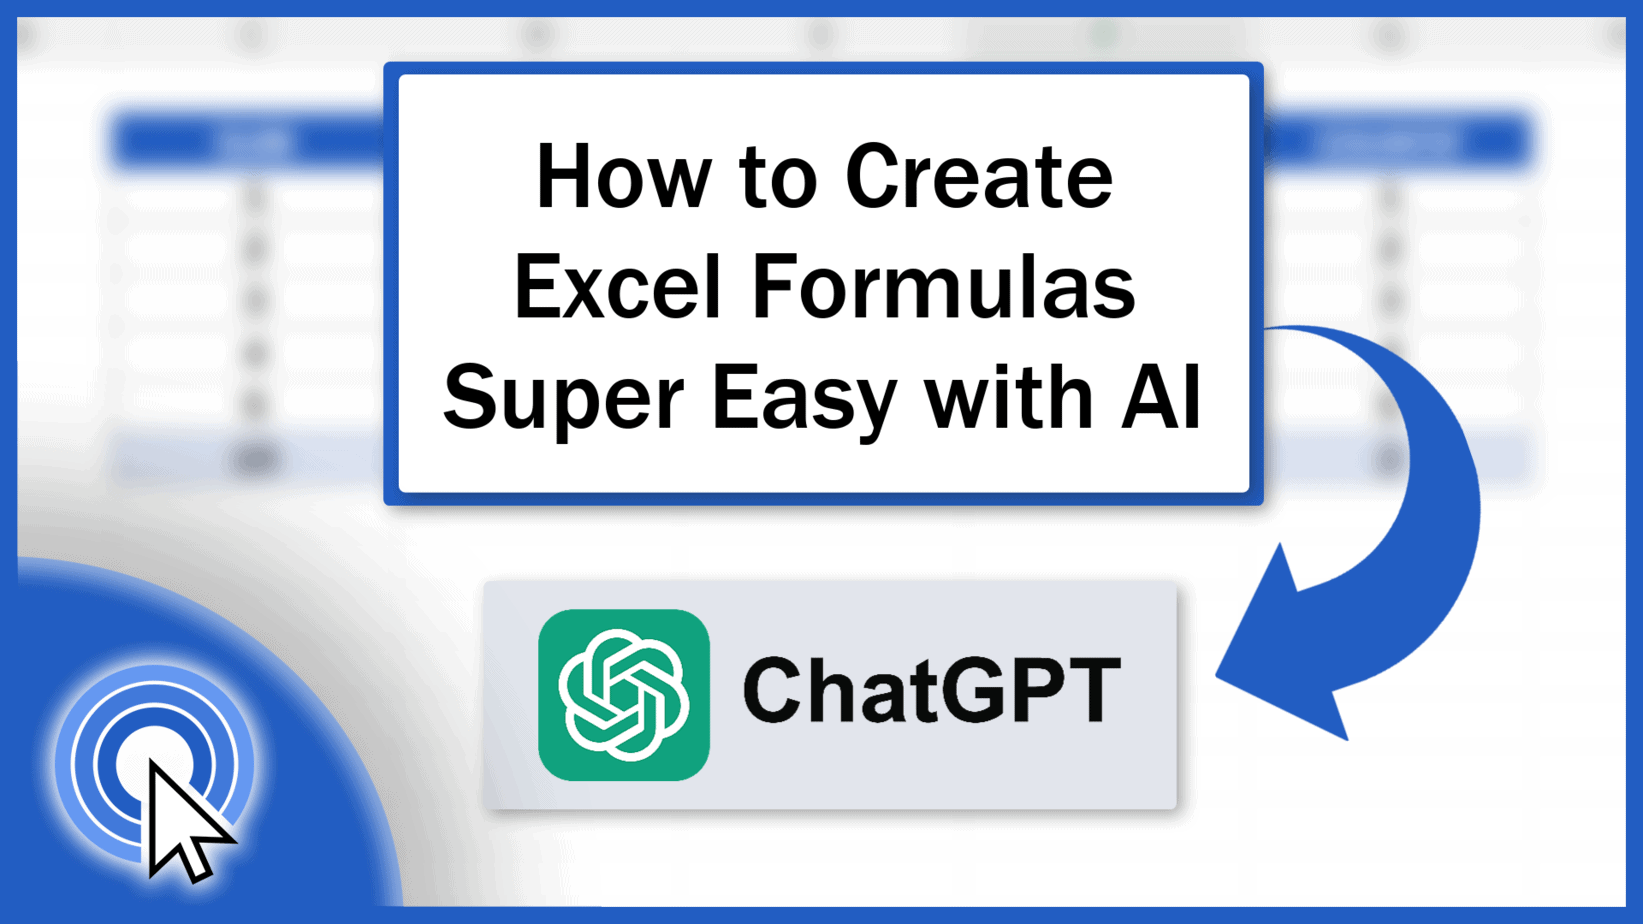 How to Create Excel Formulas Super Easy with AI